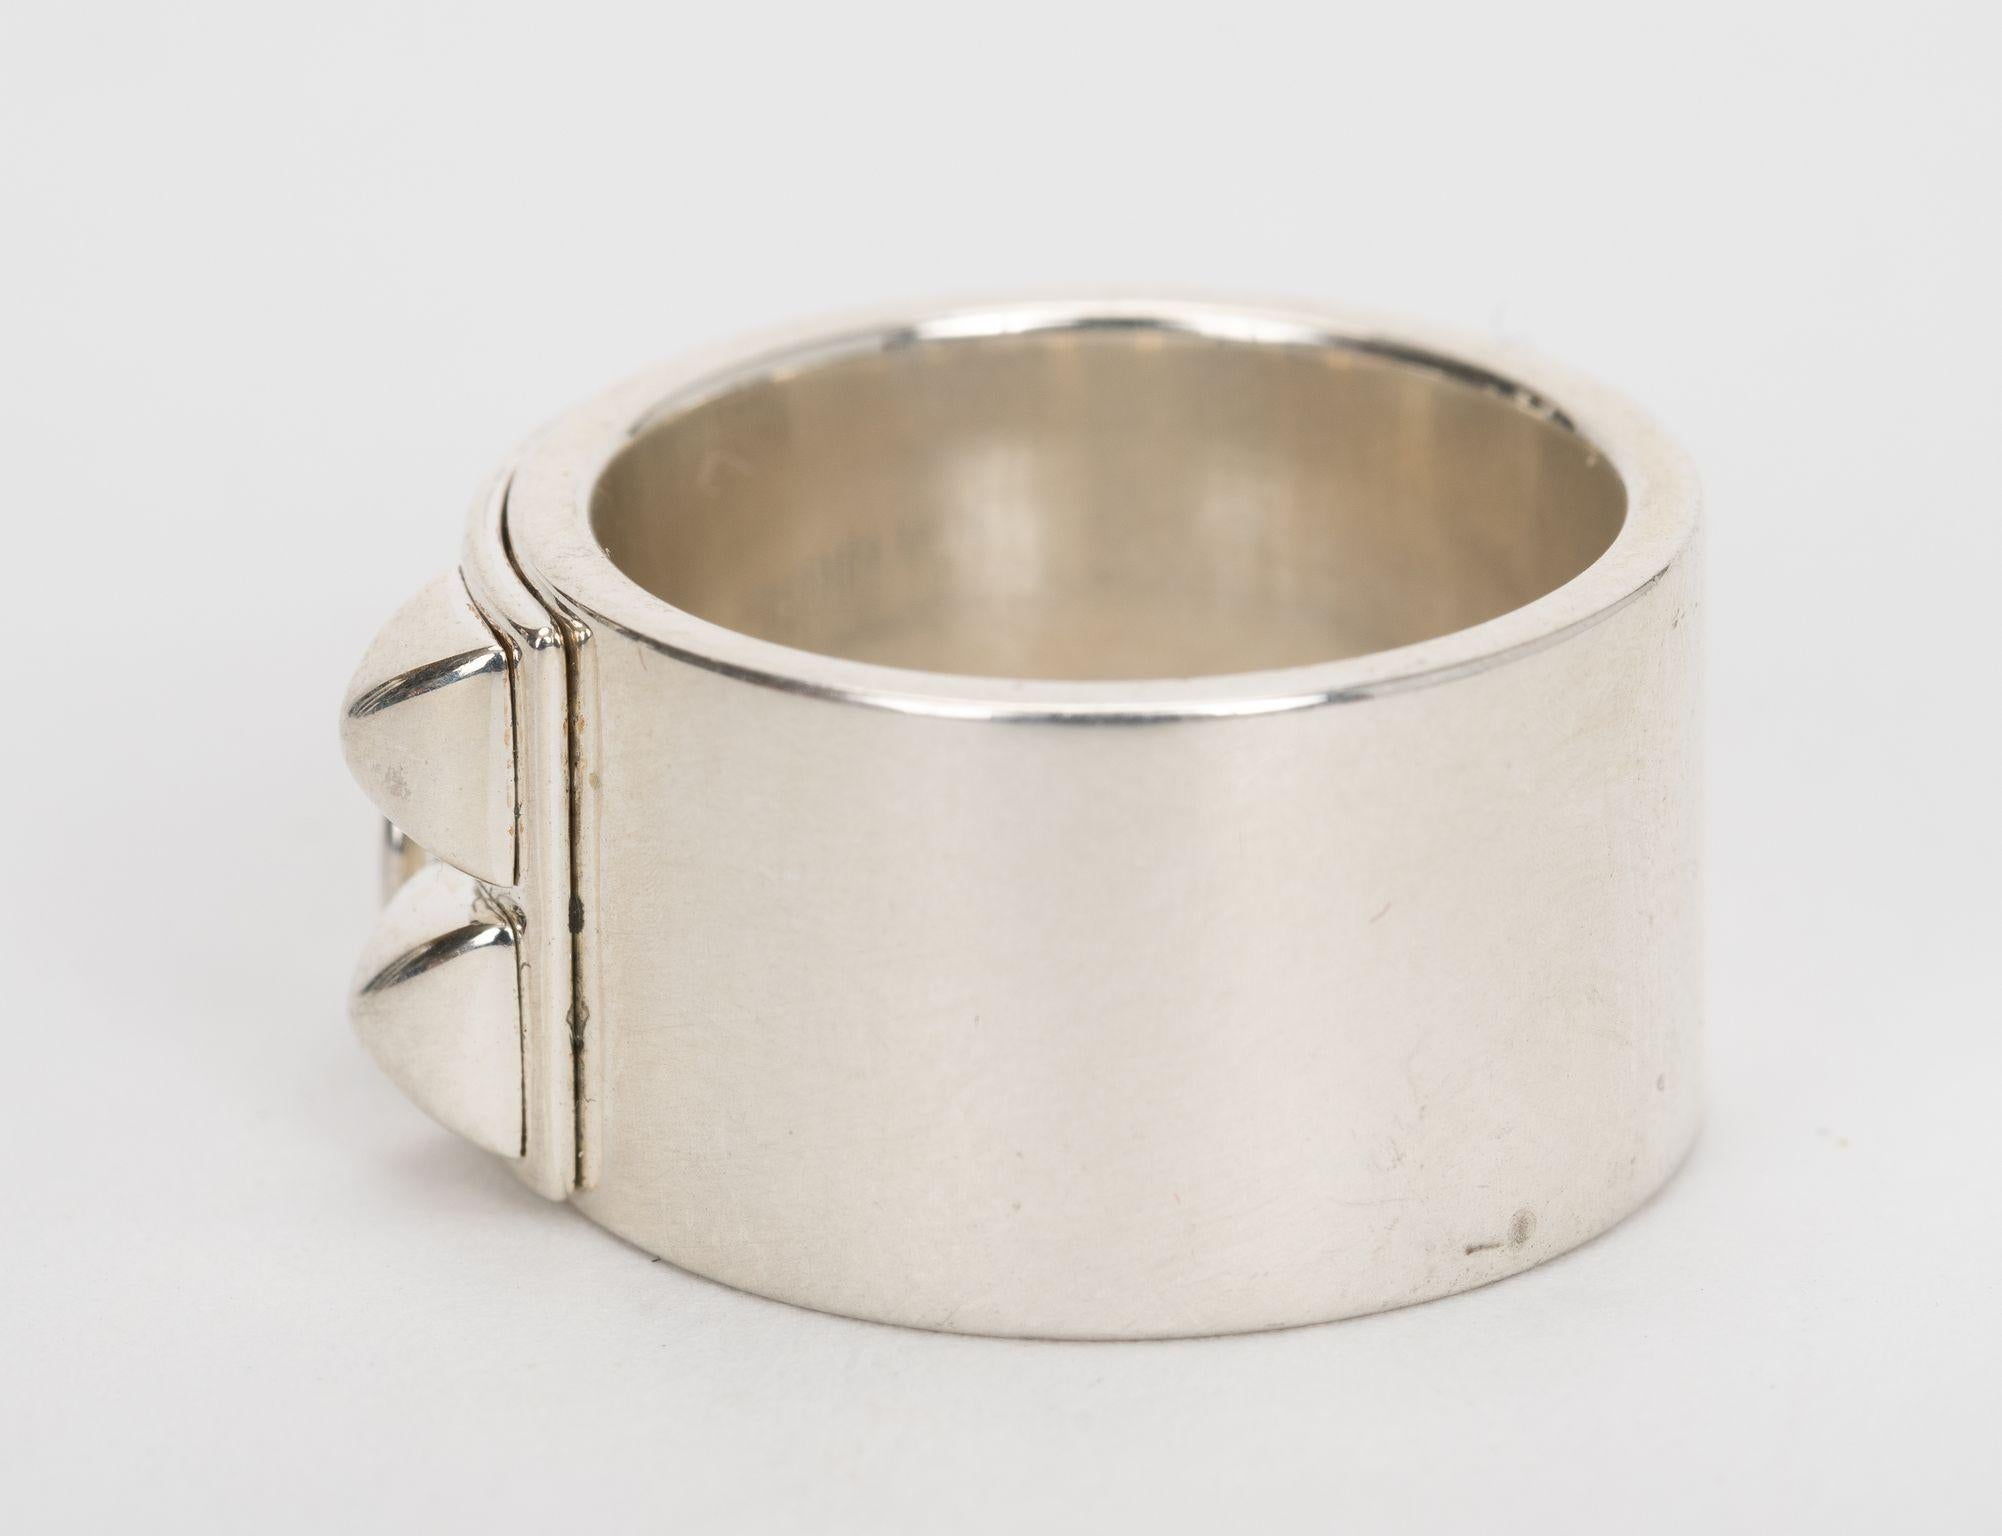 Hermes Sterling SilCollier de Chien Ring In Excellent Condition For Sale In West Hollywood, CA